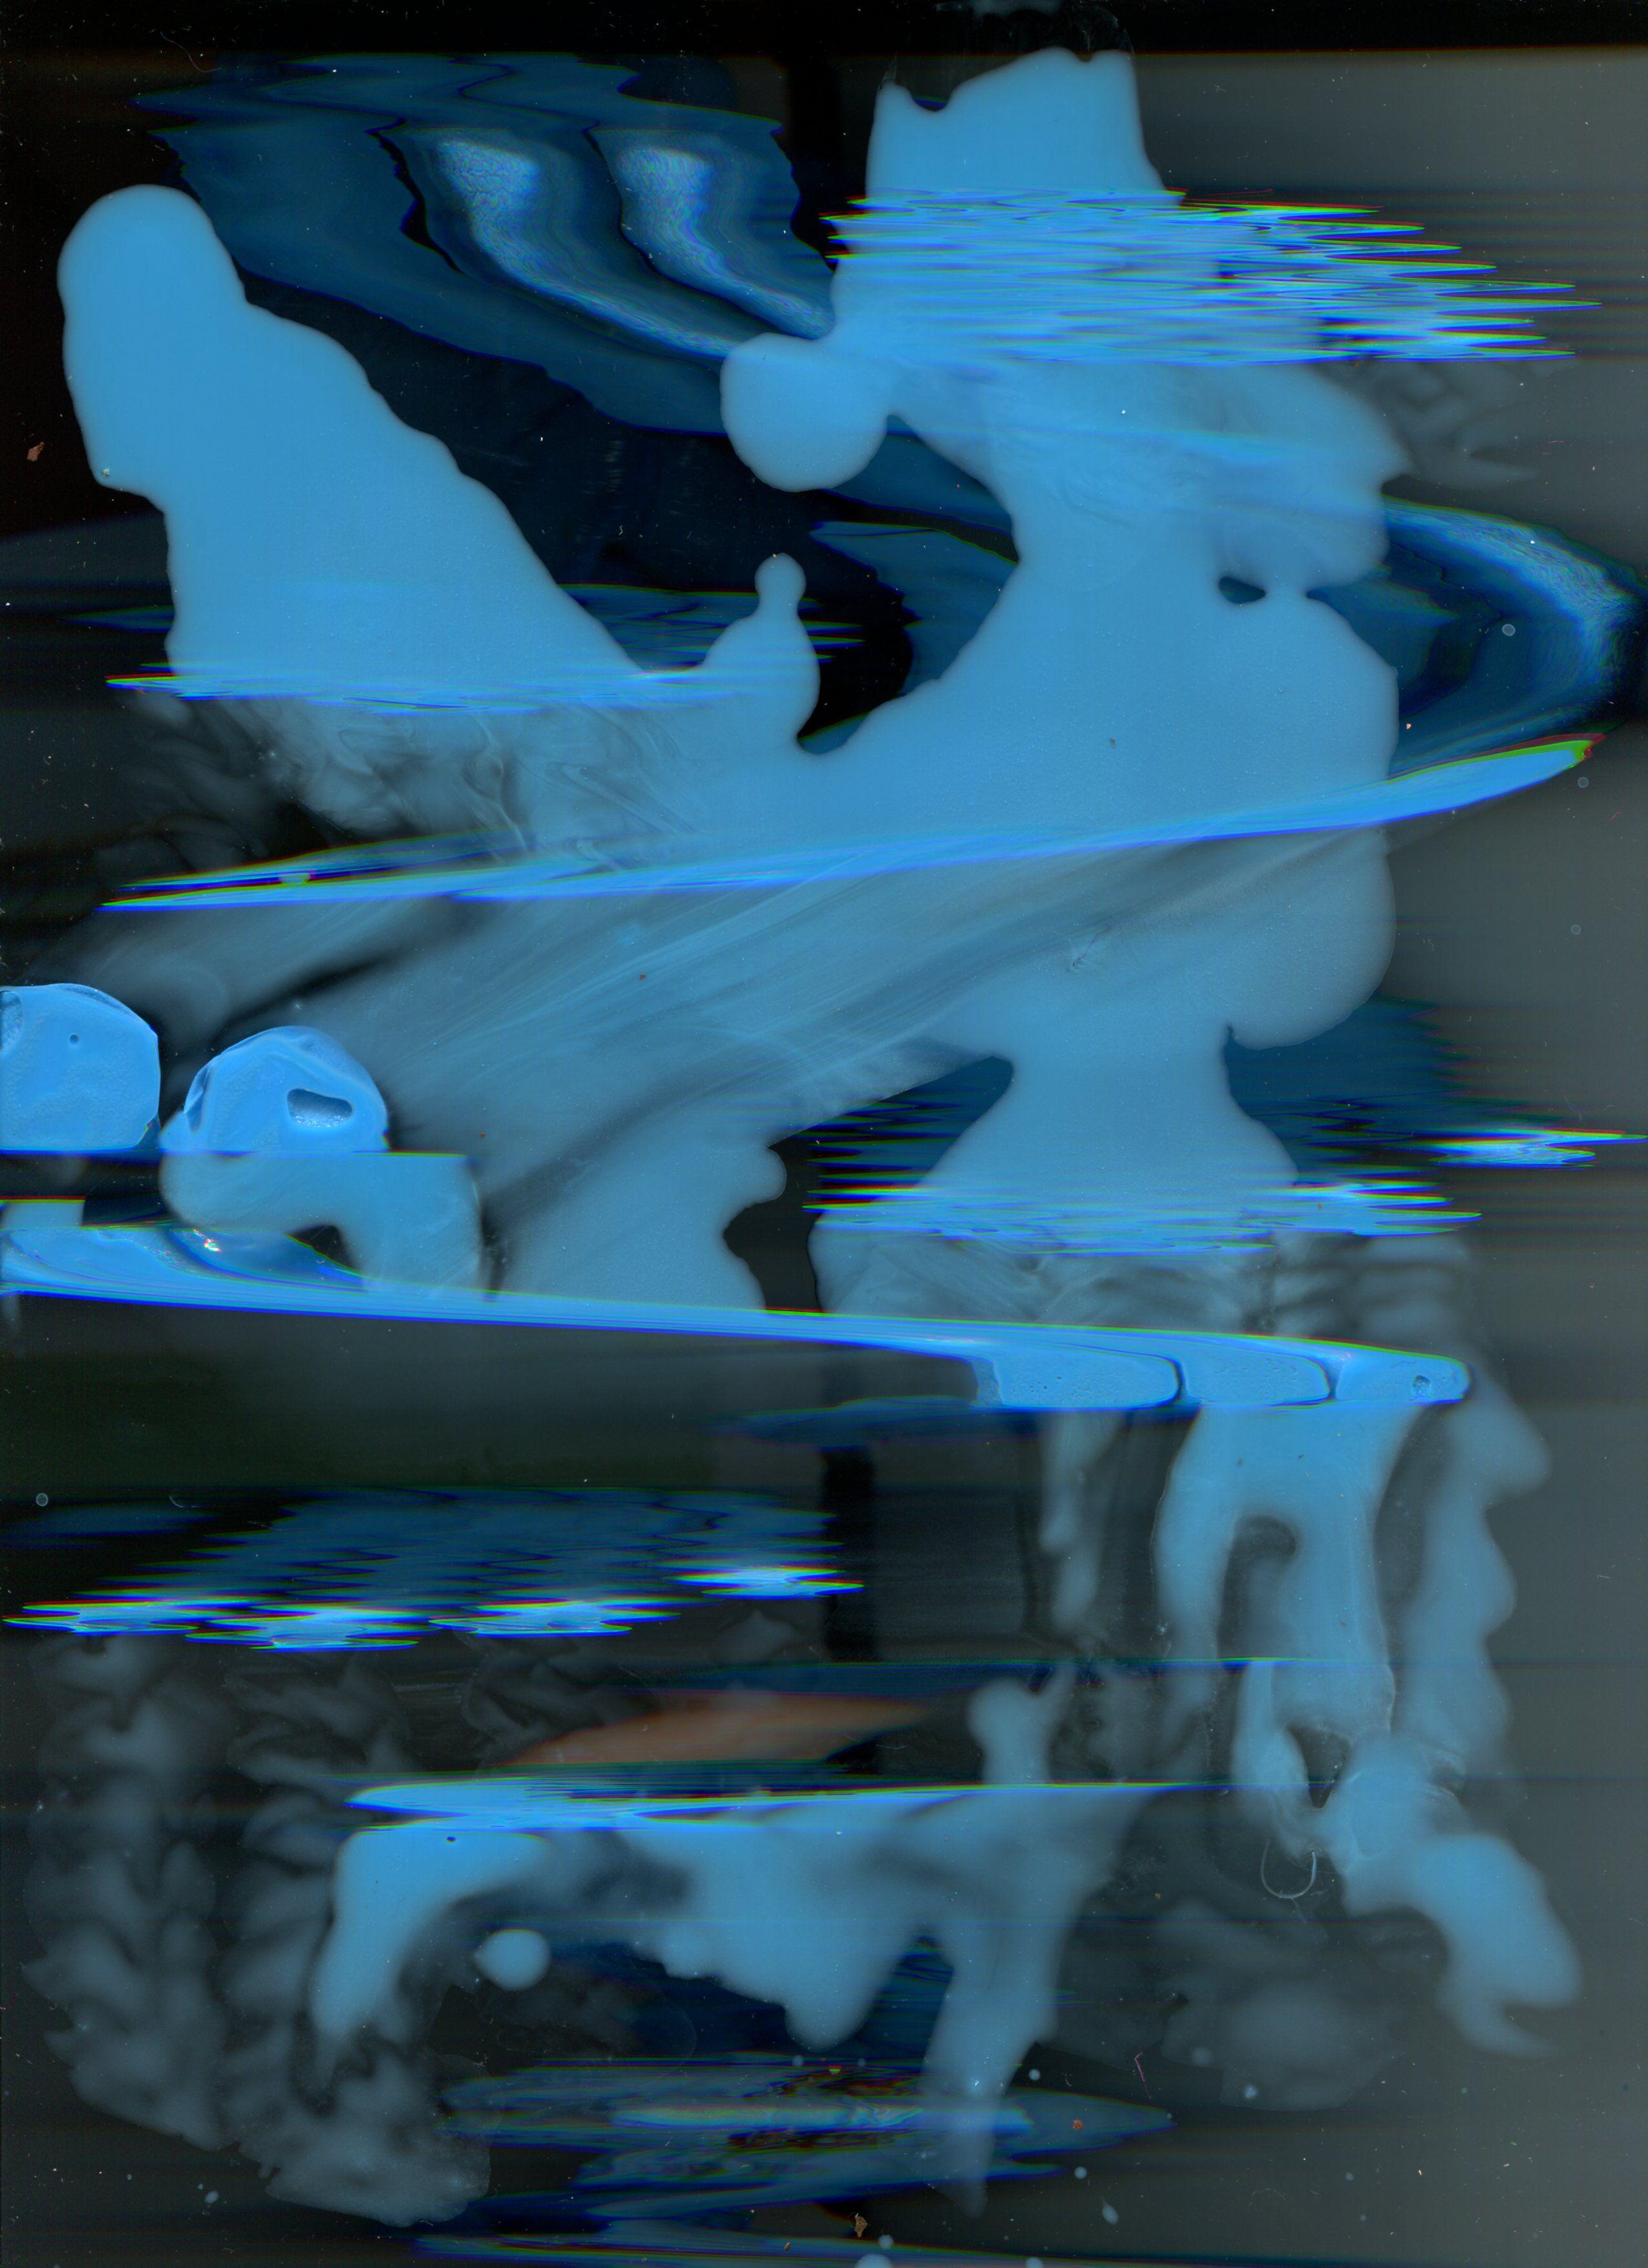 Sophia Rauch Abstract Photograph - "UNTITLED (BLUE ERASE)", digital scan, photo paper, sculpture, assemblage, time